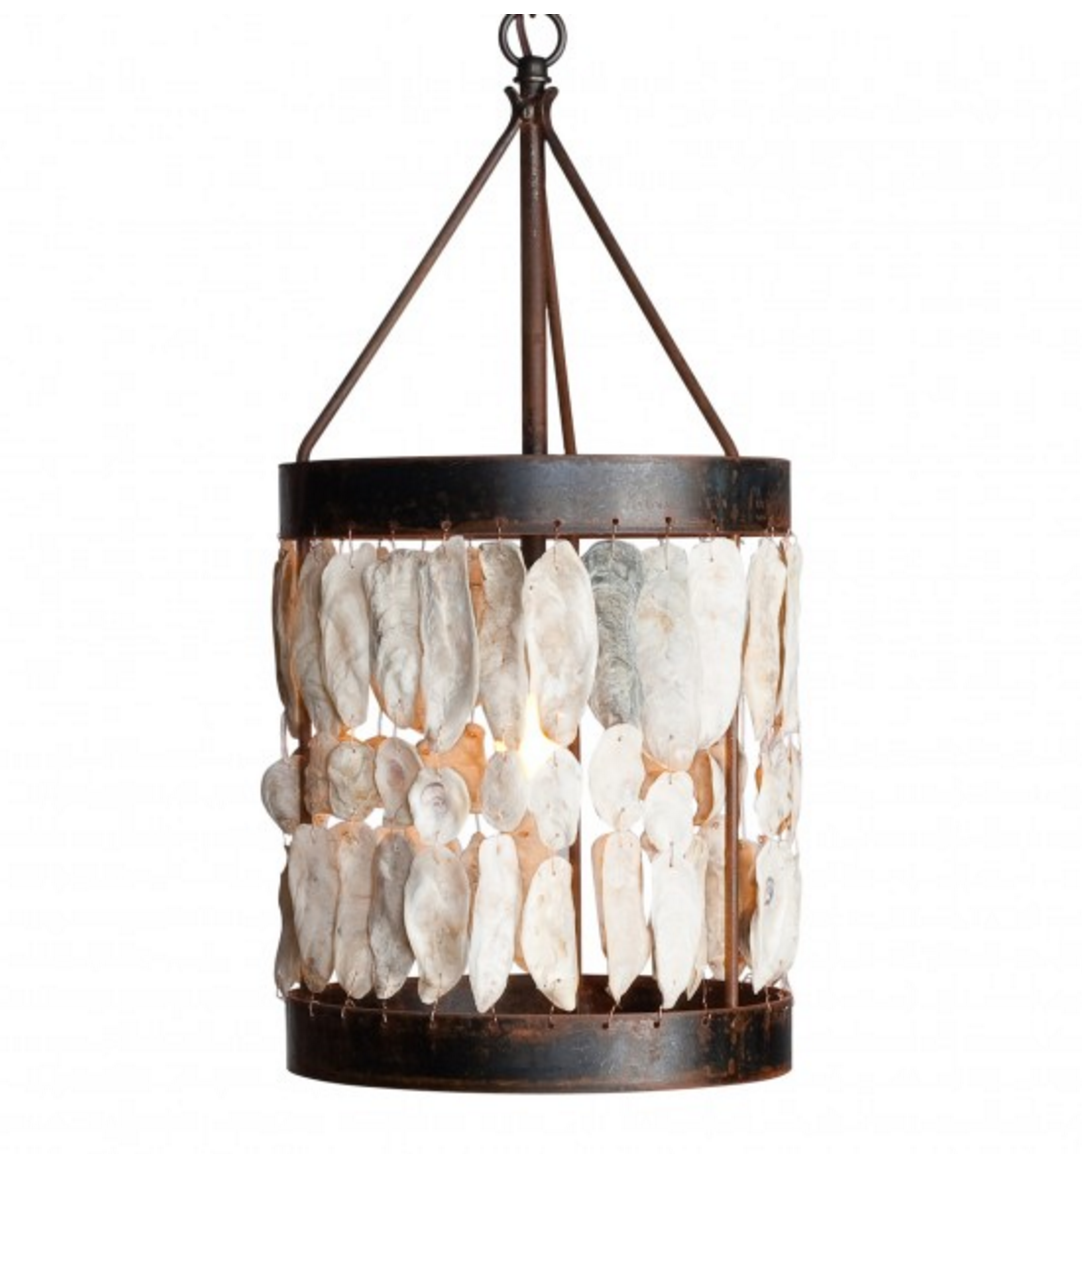 Low Country Shell Drum Pendant Light - Revibe Designs